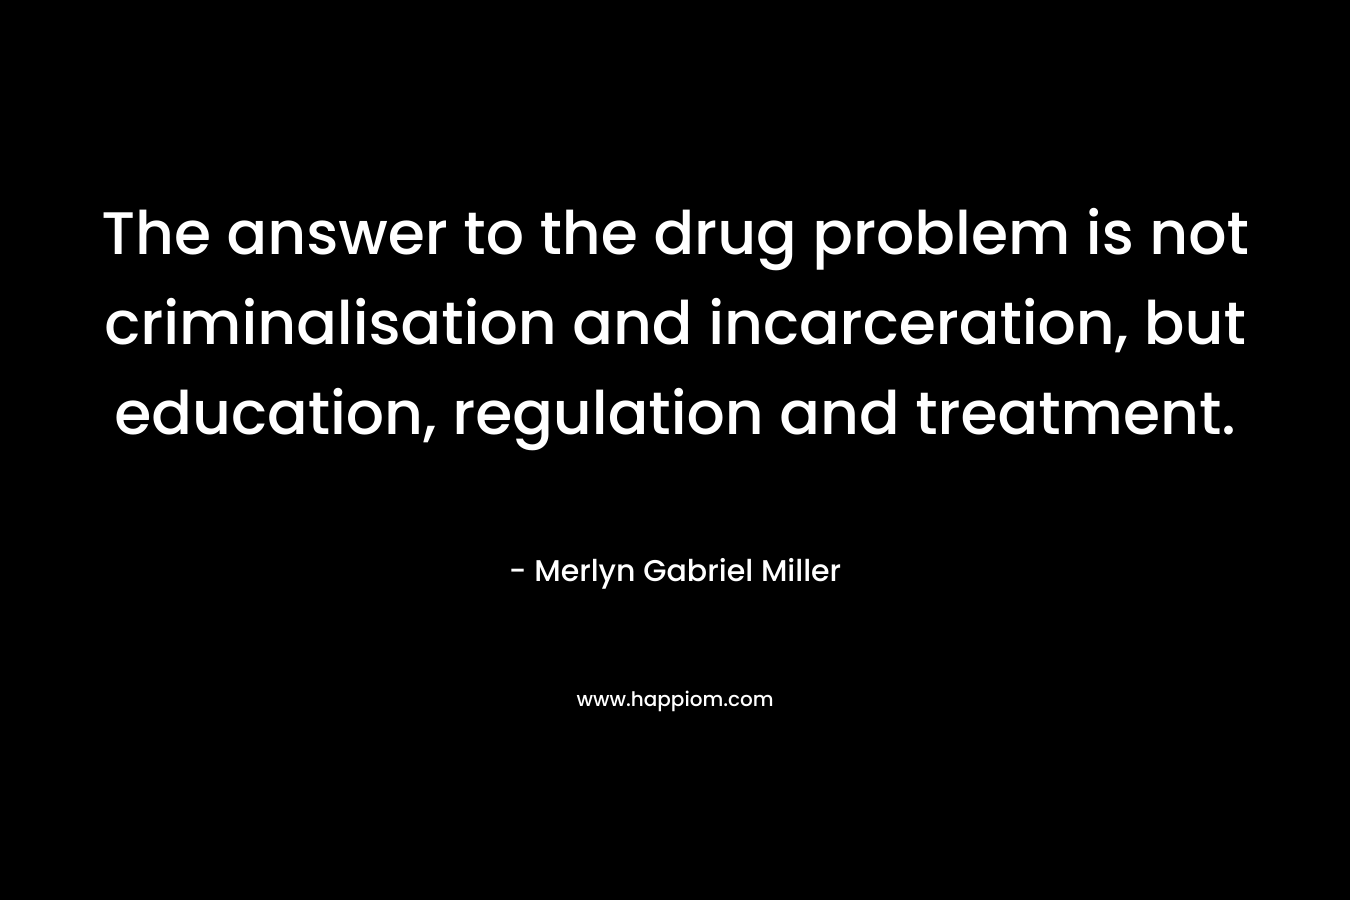 The answer to the drug problem is not criminalisation and incarceration, but education, regulation and treatment. – Merlyn Gabriel Miller